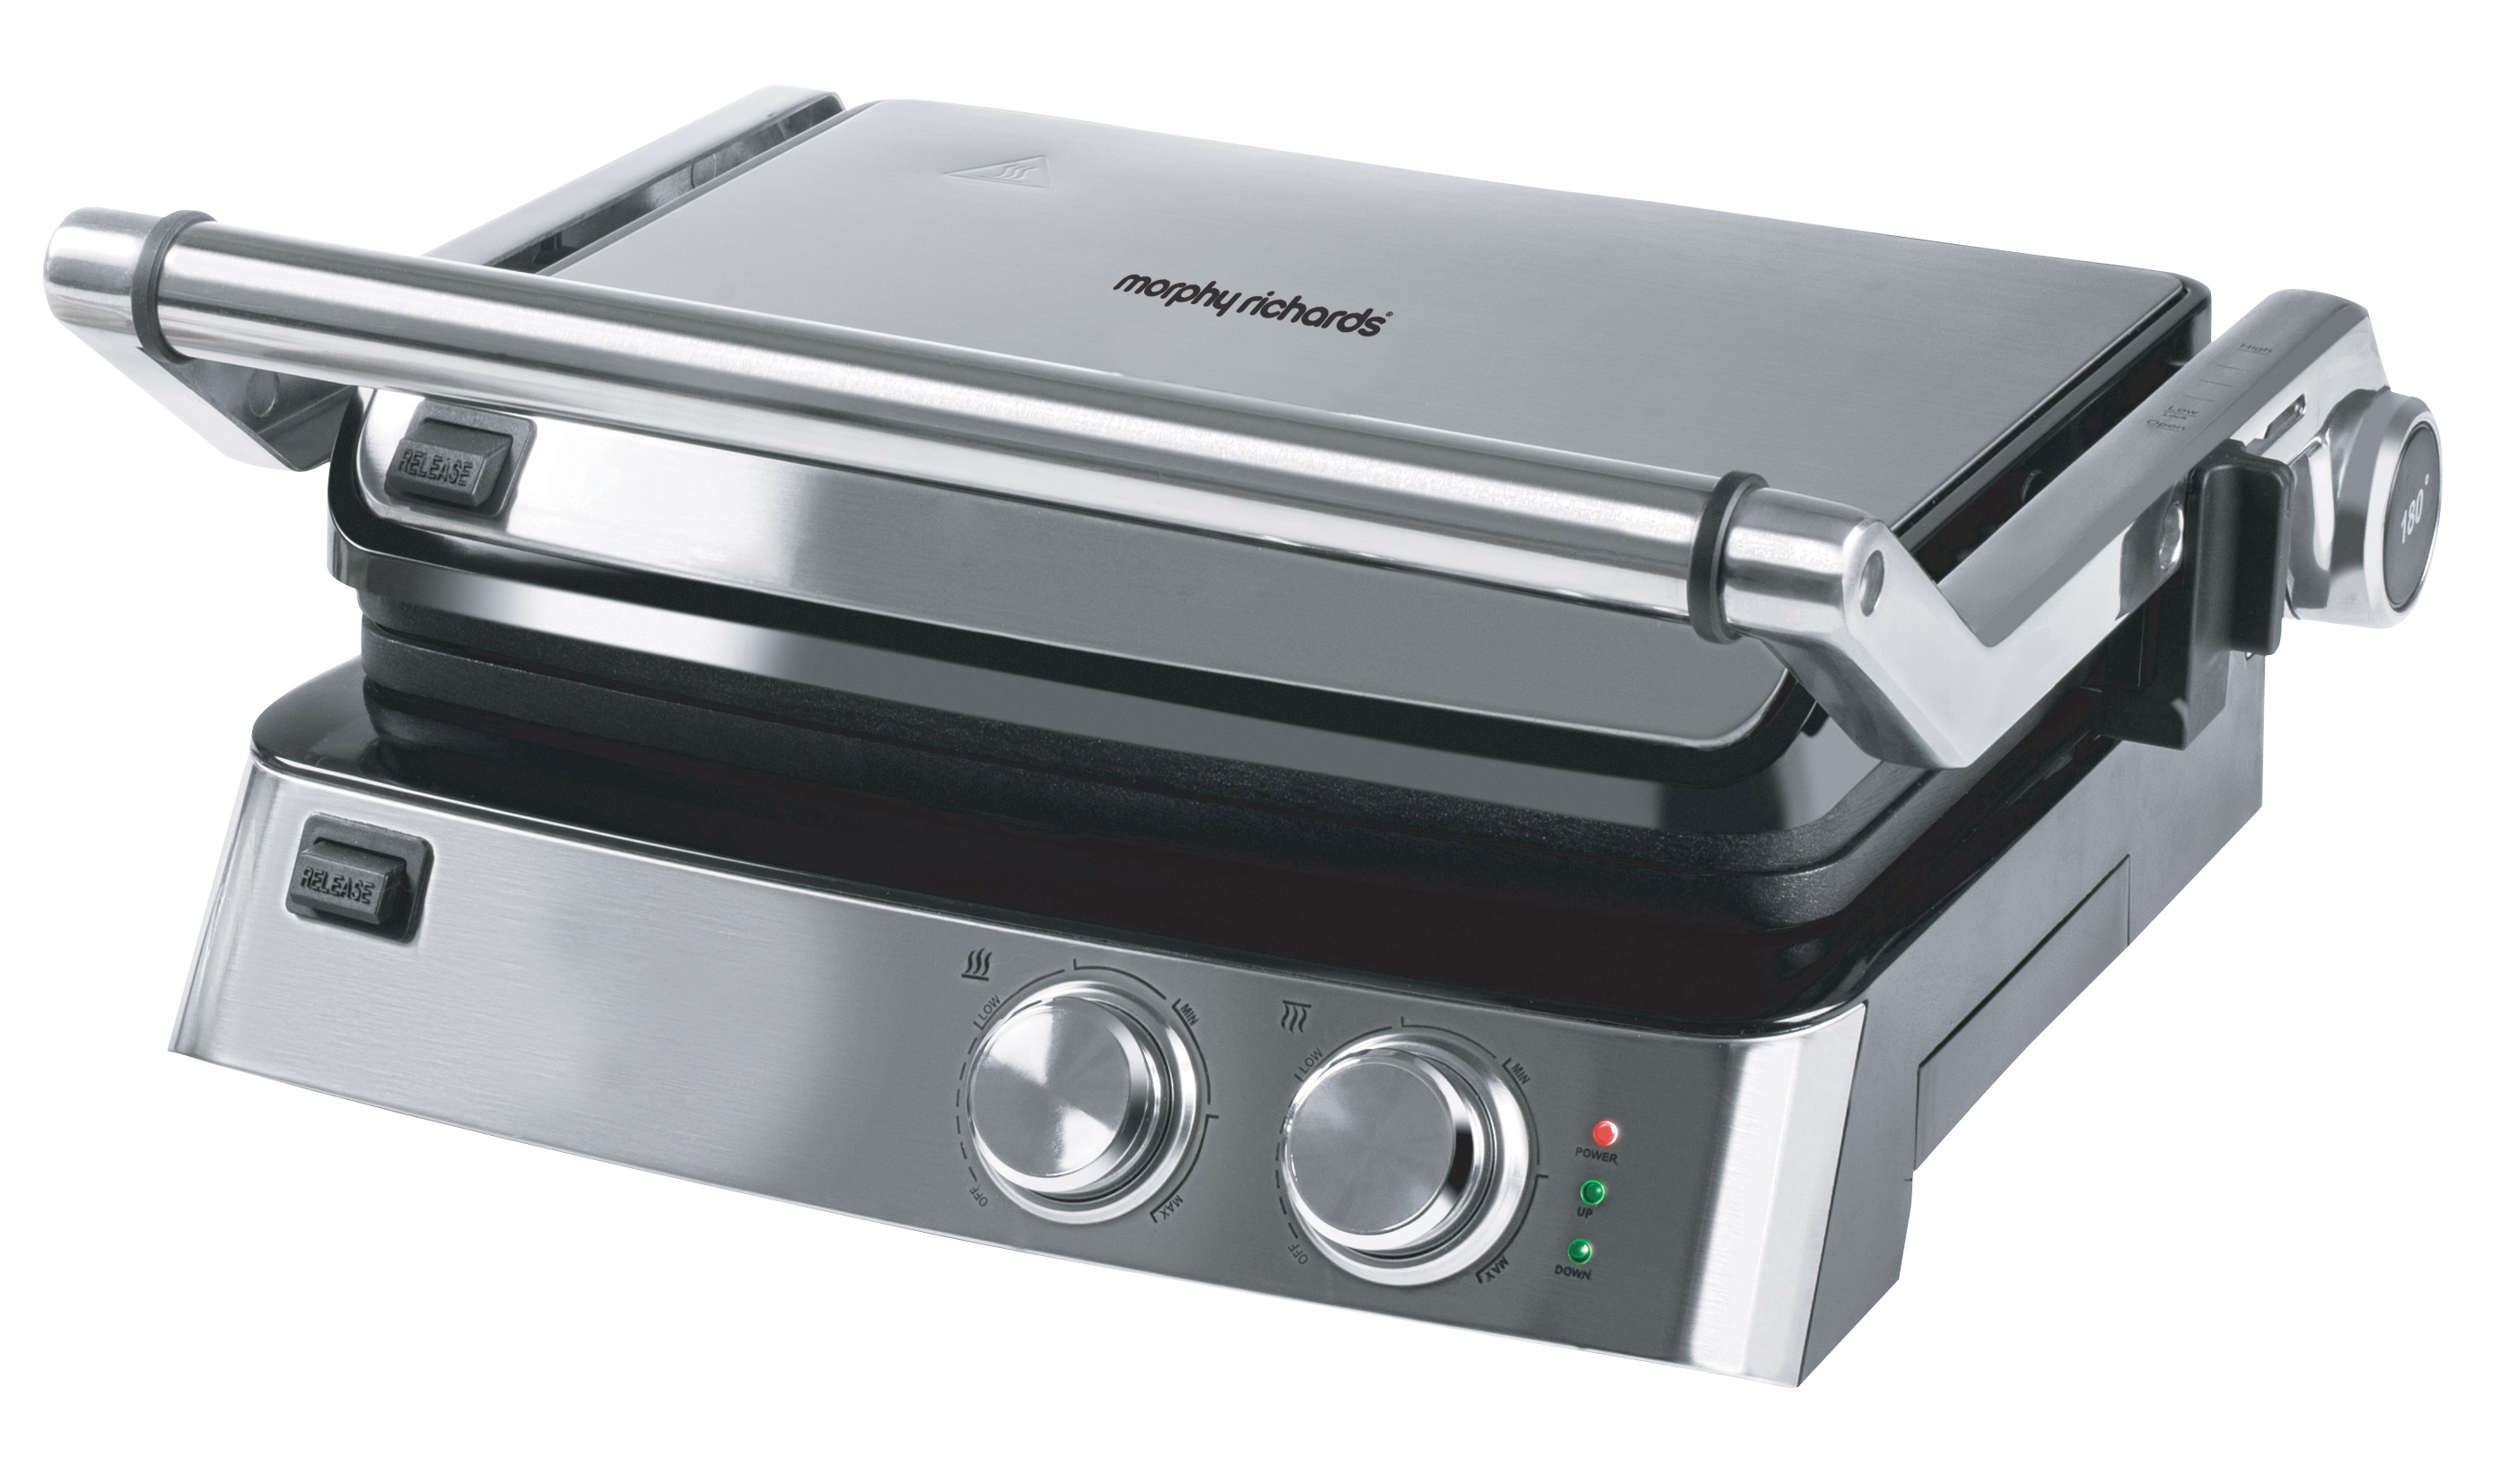 MORPHY RICHARDS 981001 GRILL & TOAST REMOVABLE PLATES 1500W